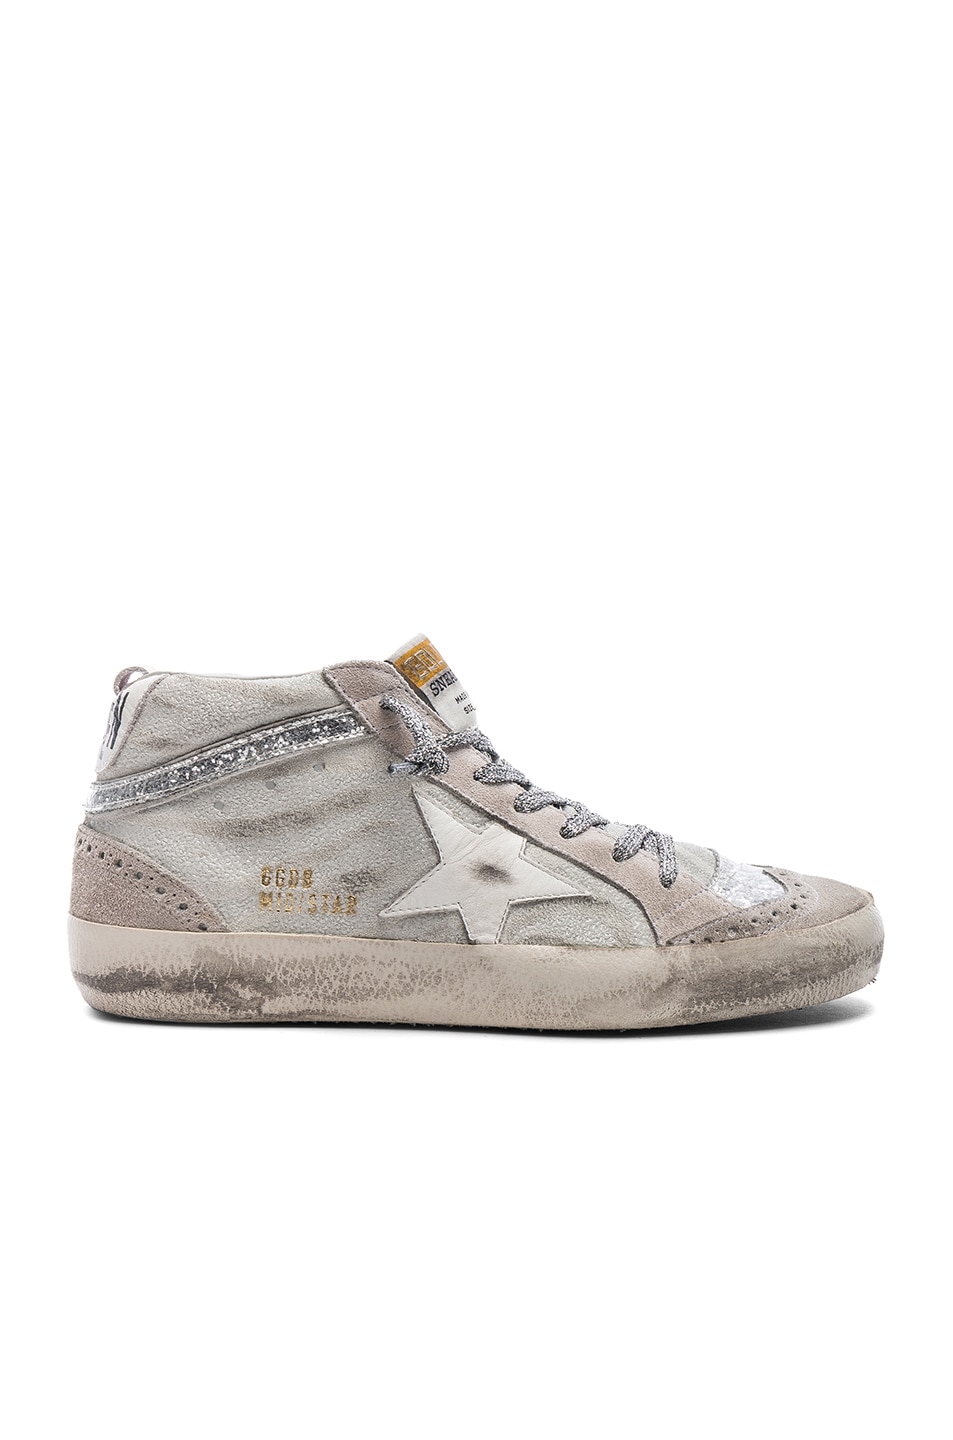 Image 1 of Golden Goose Suede Mid Star Sneakers in White & Silver